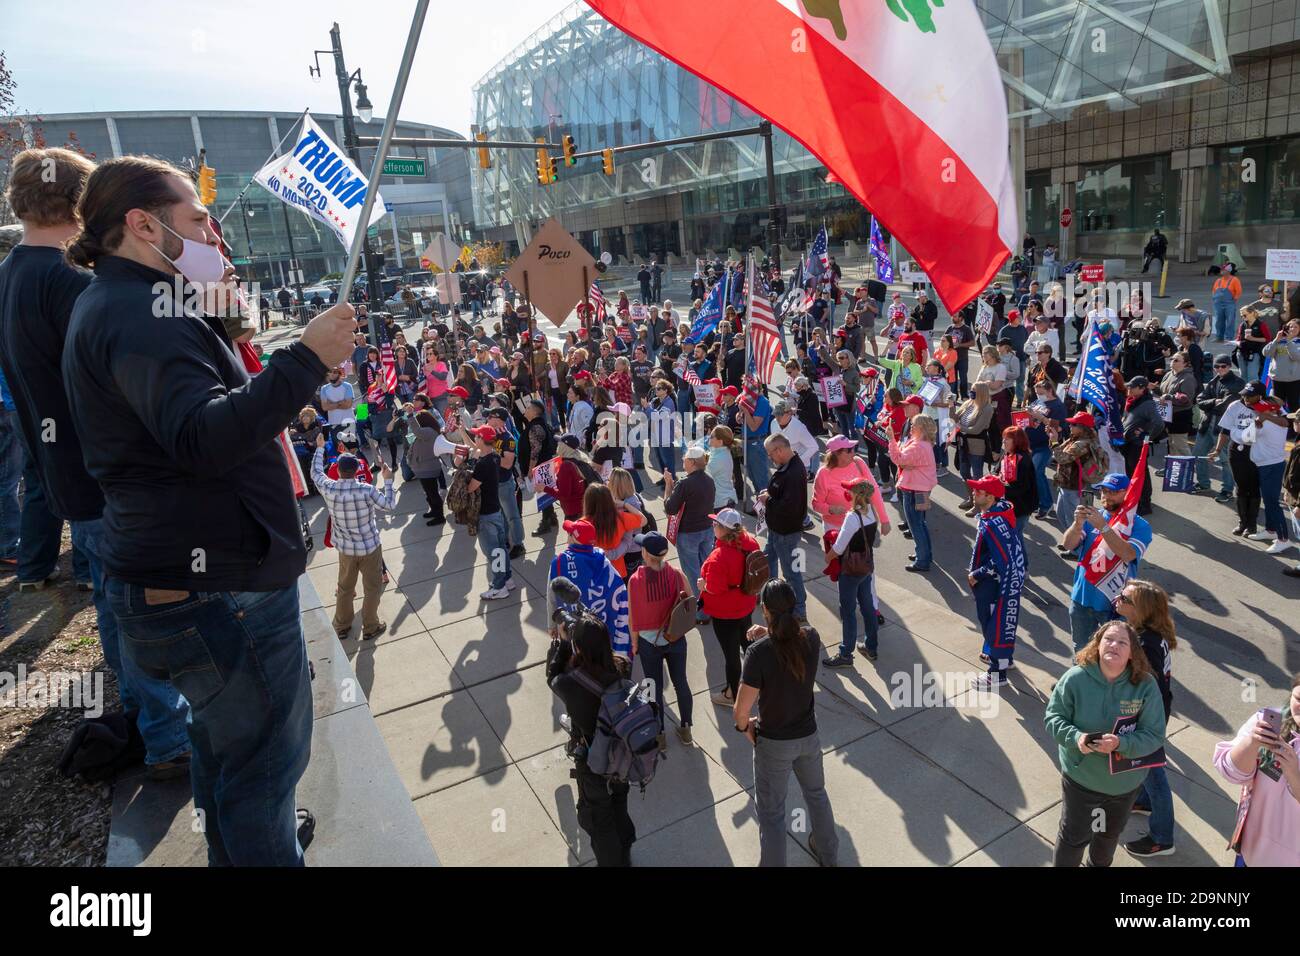 Detroit, Michigan, USA. 6th Nov, 2020. Supporters of Prsident Donald Trump rally outside the TCF Center, where absentee ballots in the 2020 presidential election were counted. They charged that the election was being stolen from Trump. Credit: Jim West/Alamy Live News Stock Photo